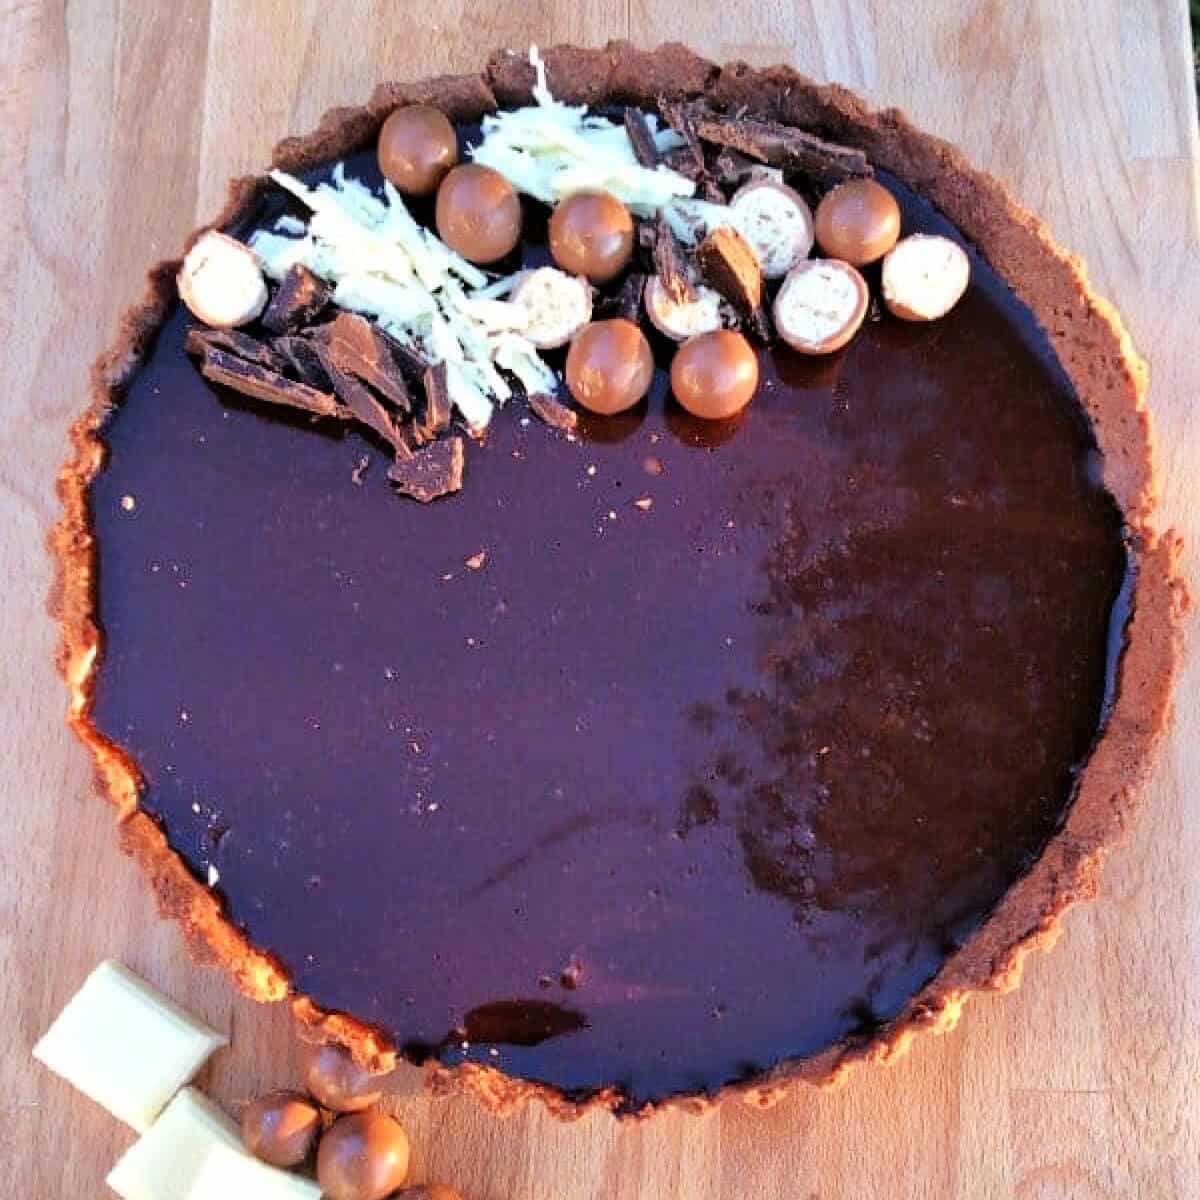 Chocolate tart with mirror glaze and chocolate decorations on wooden board.